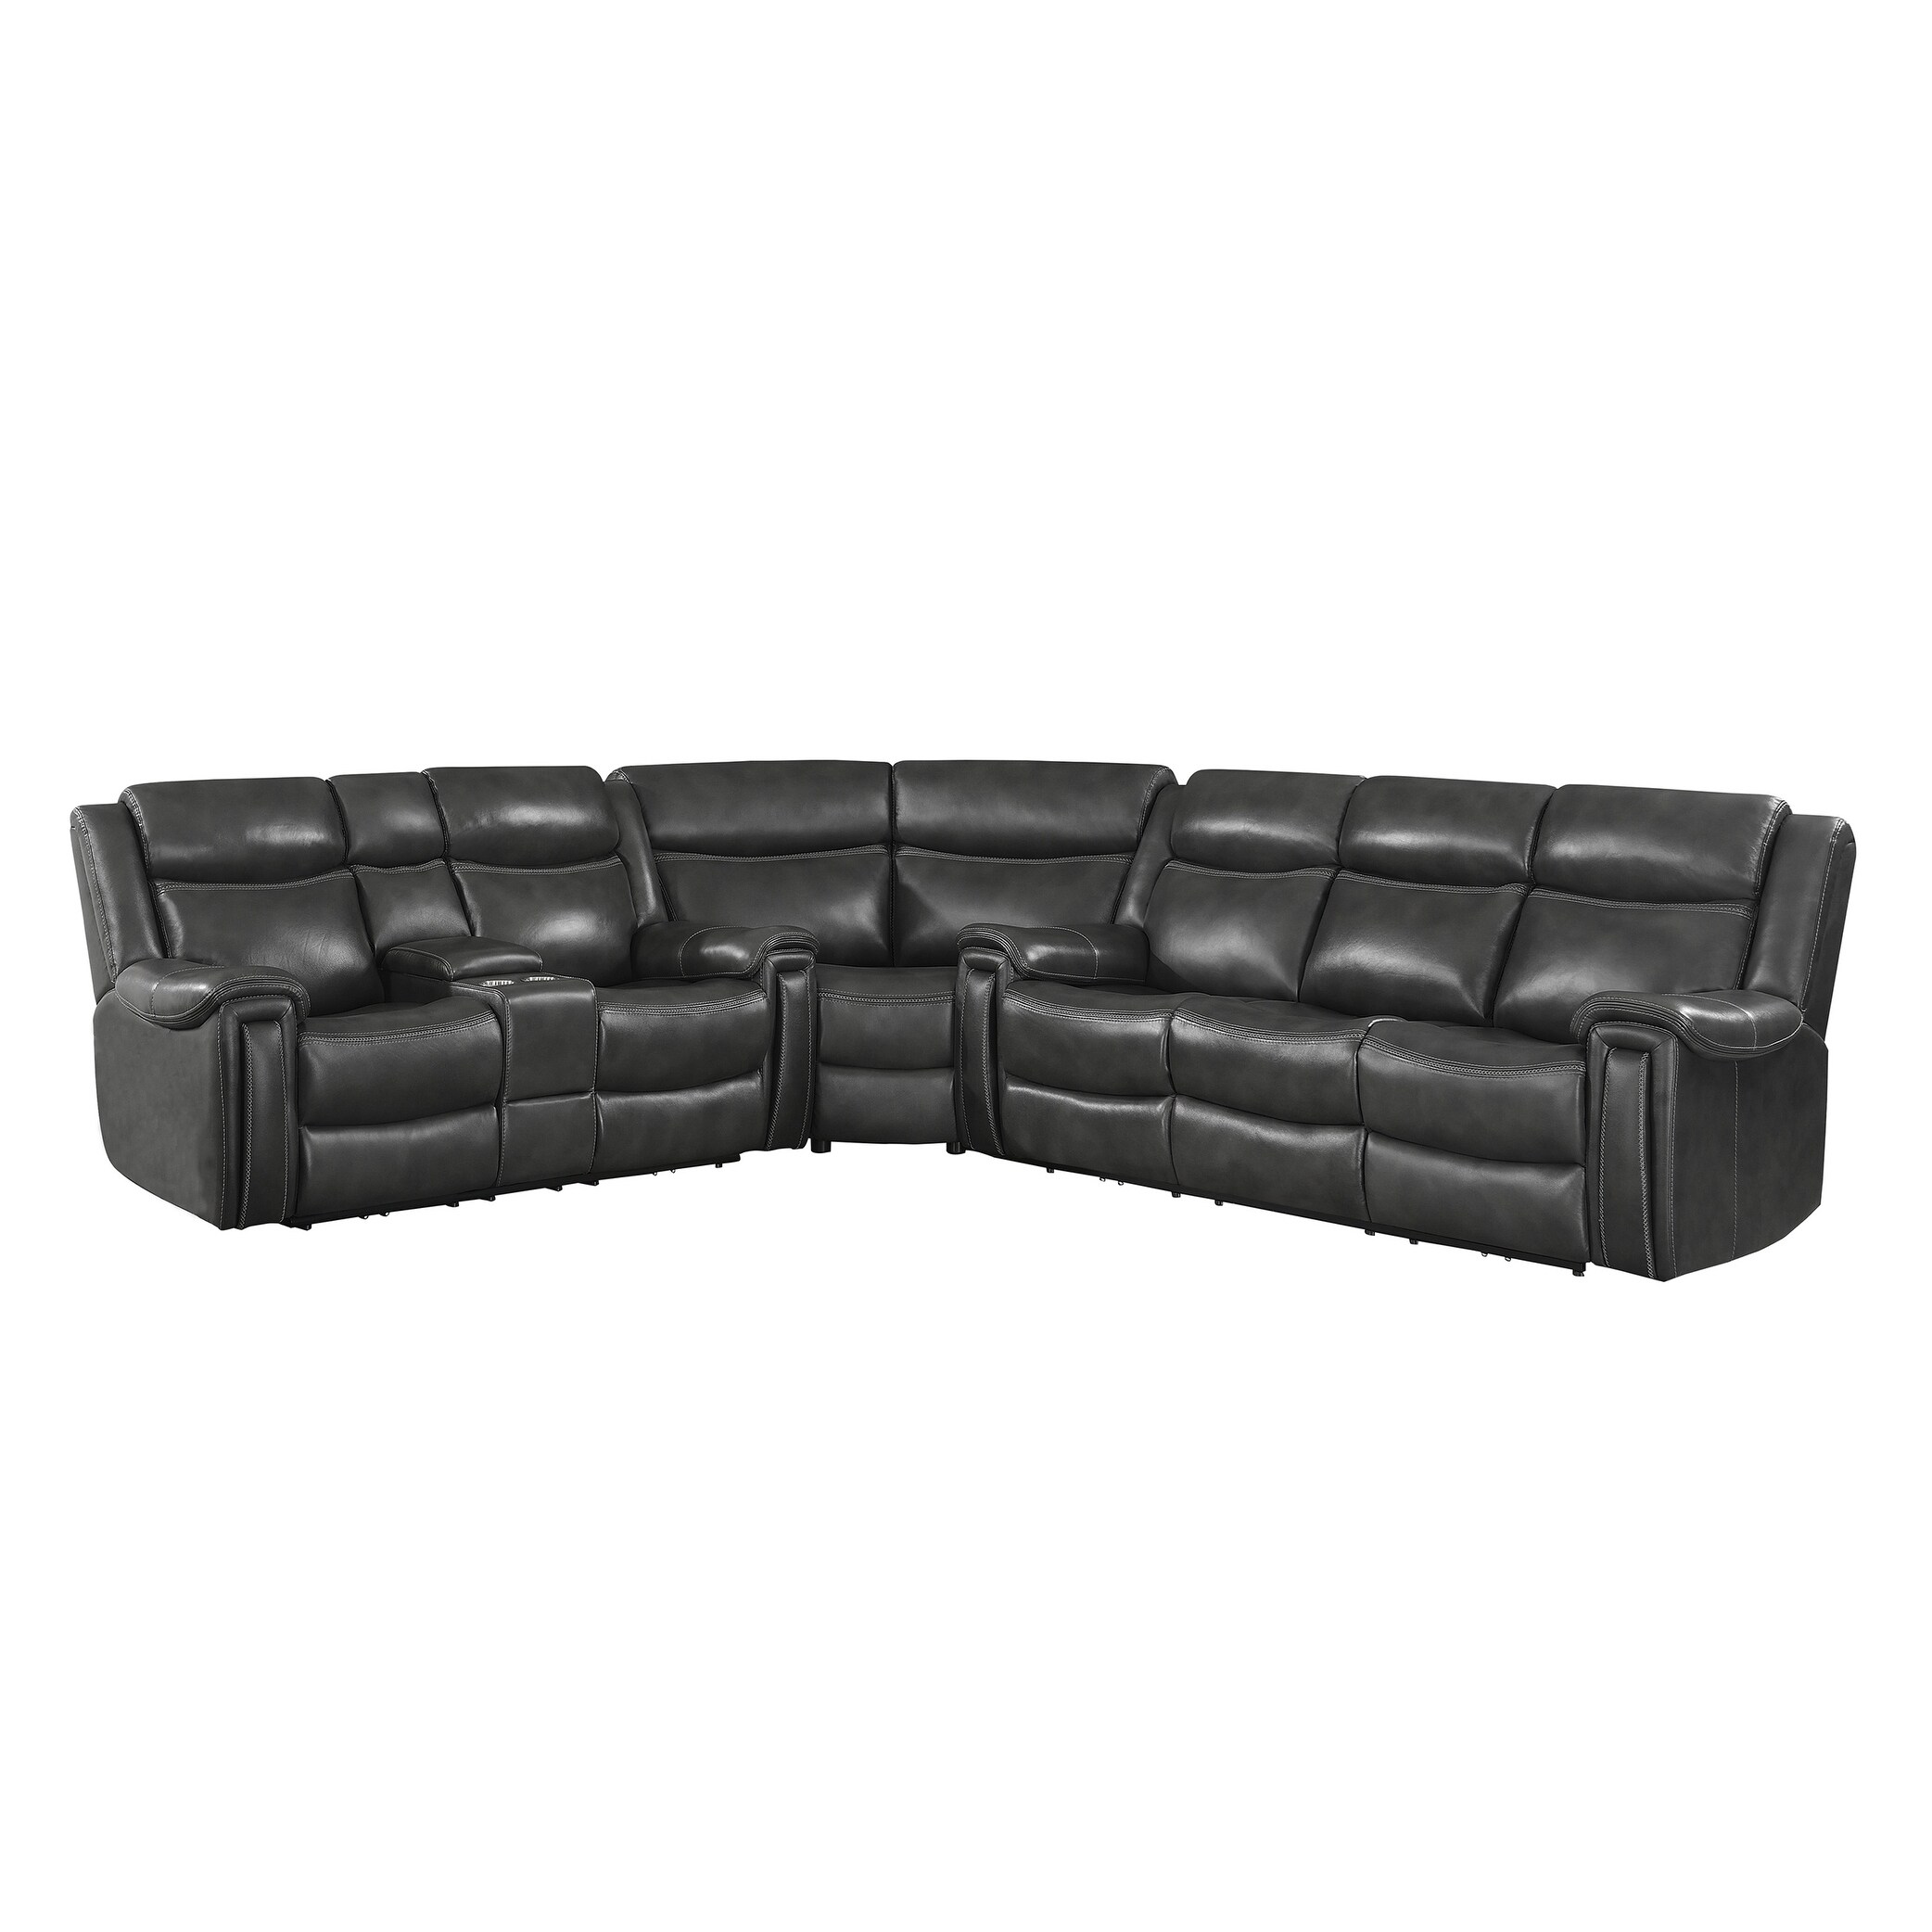 Coaster Shallowford Hand Rubbed Charcoal 3-piece Upholstered Power reclining seats with Power headrests Sectional